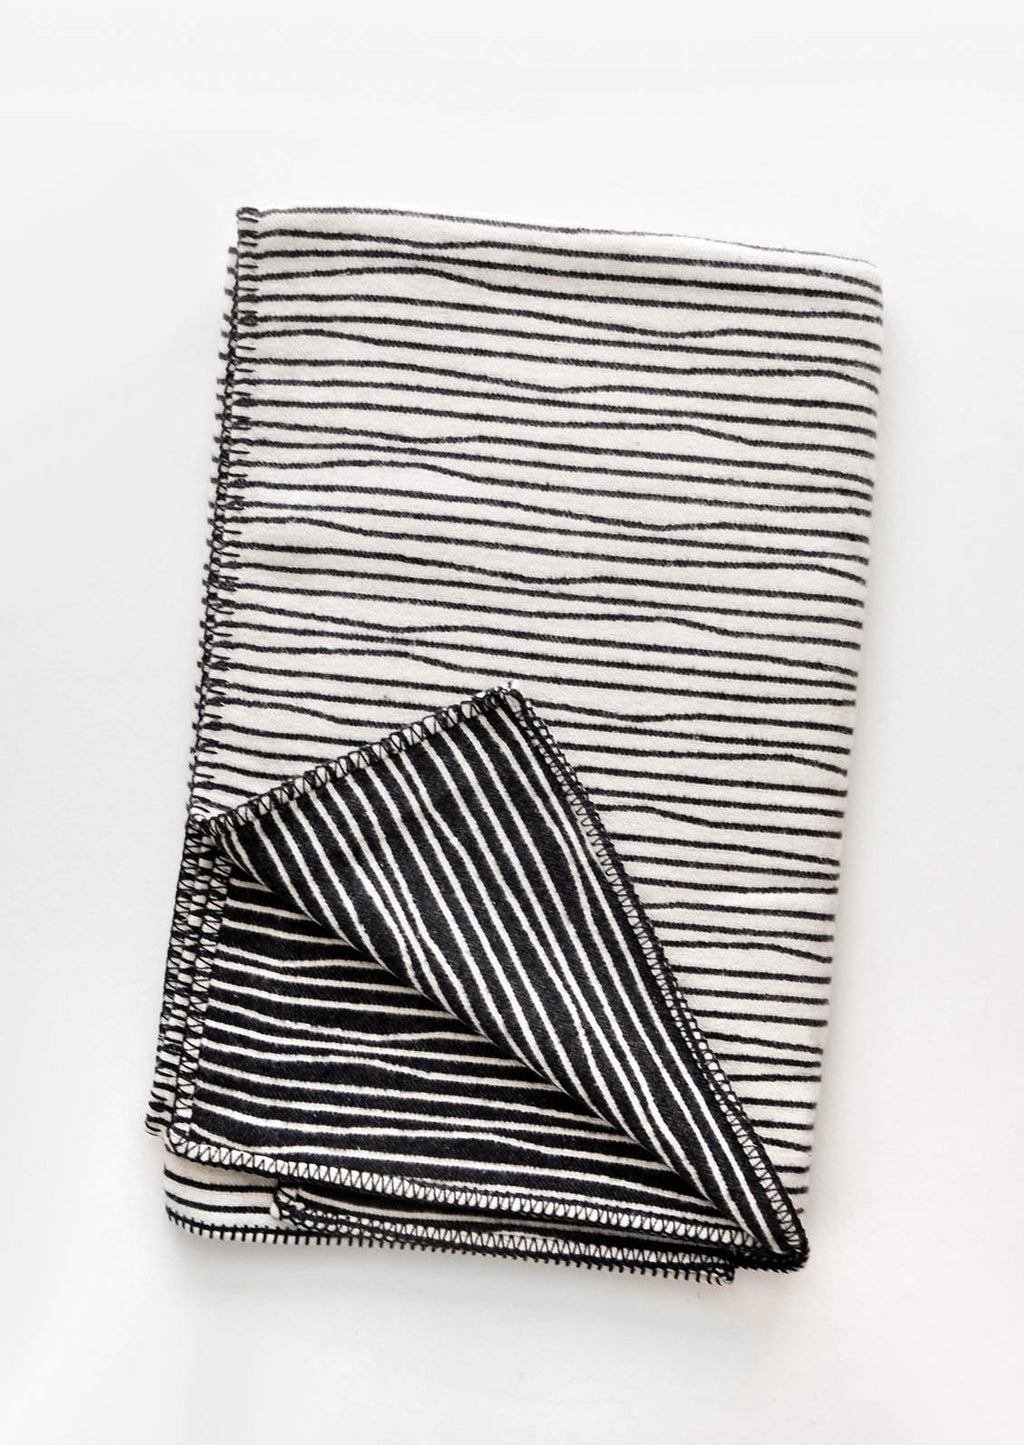 Ivory / Charcoal: Plush throw blanket with allover wavy lines print in black on white